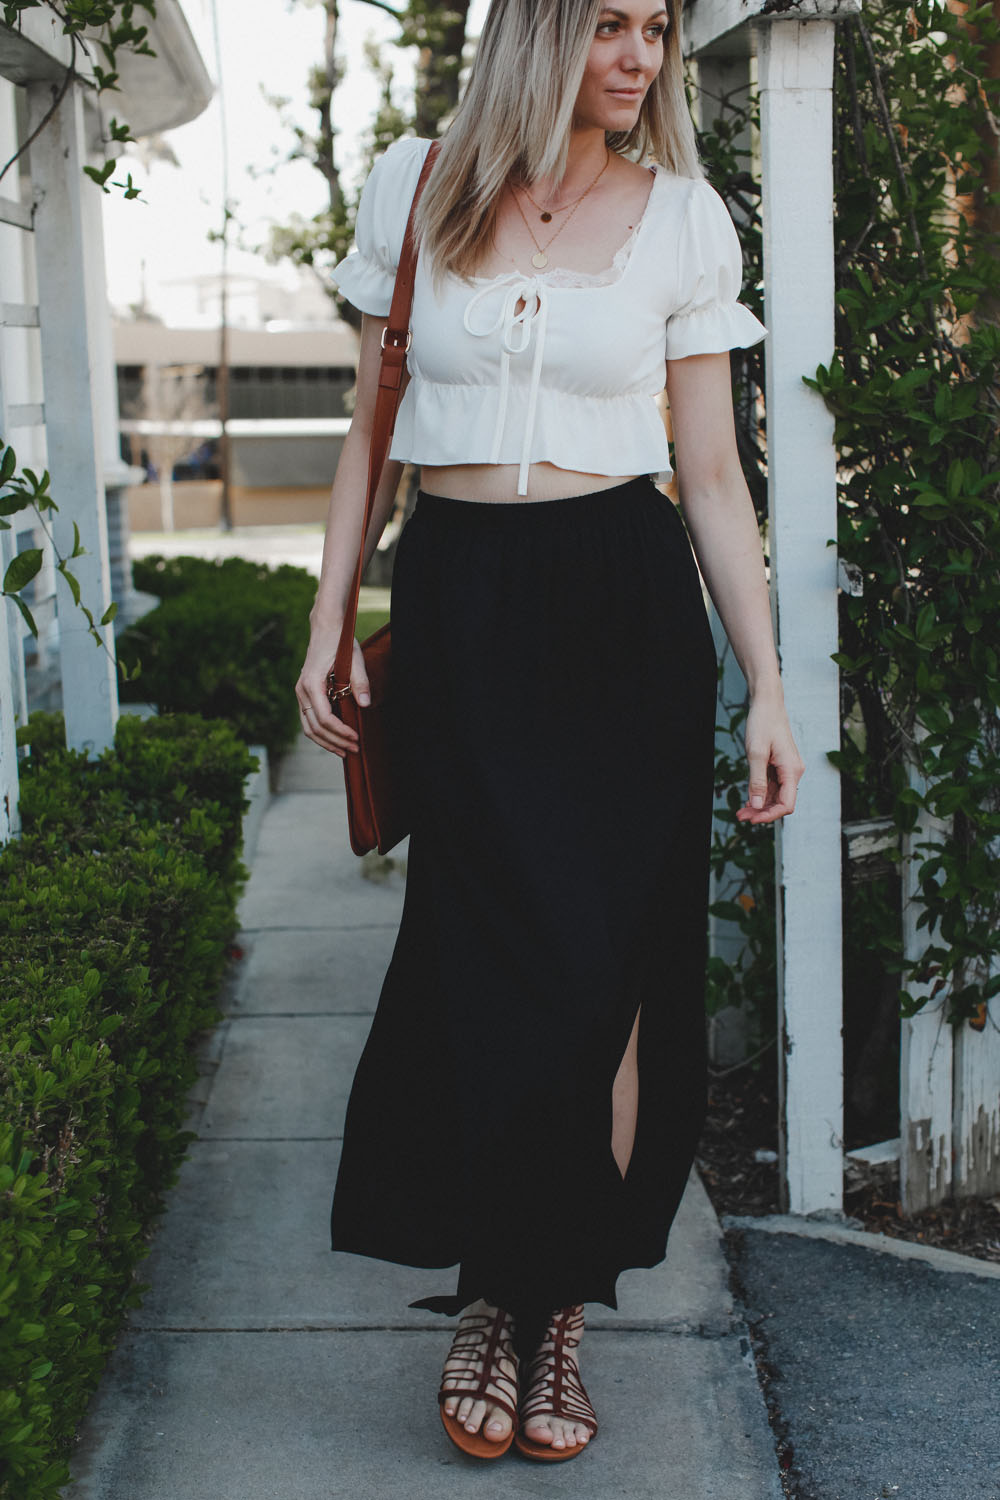 Black maxi skirt with 2 slits and a white crop top